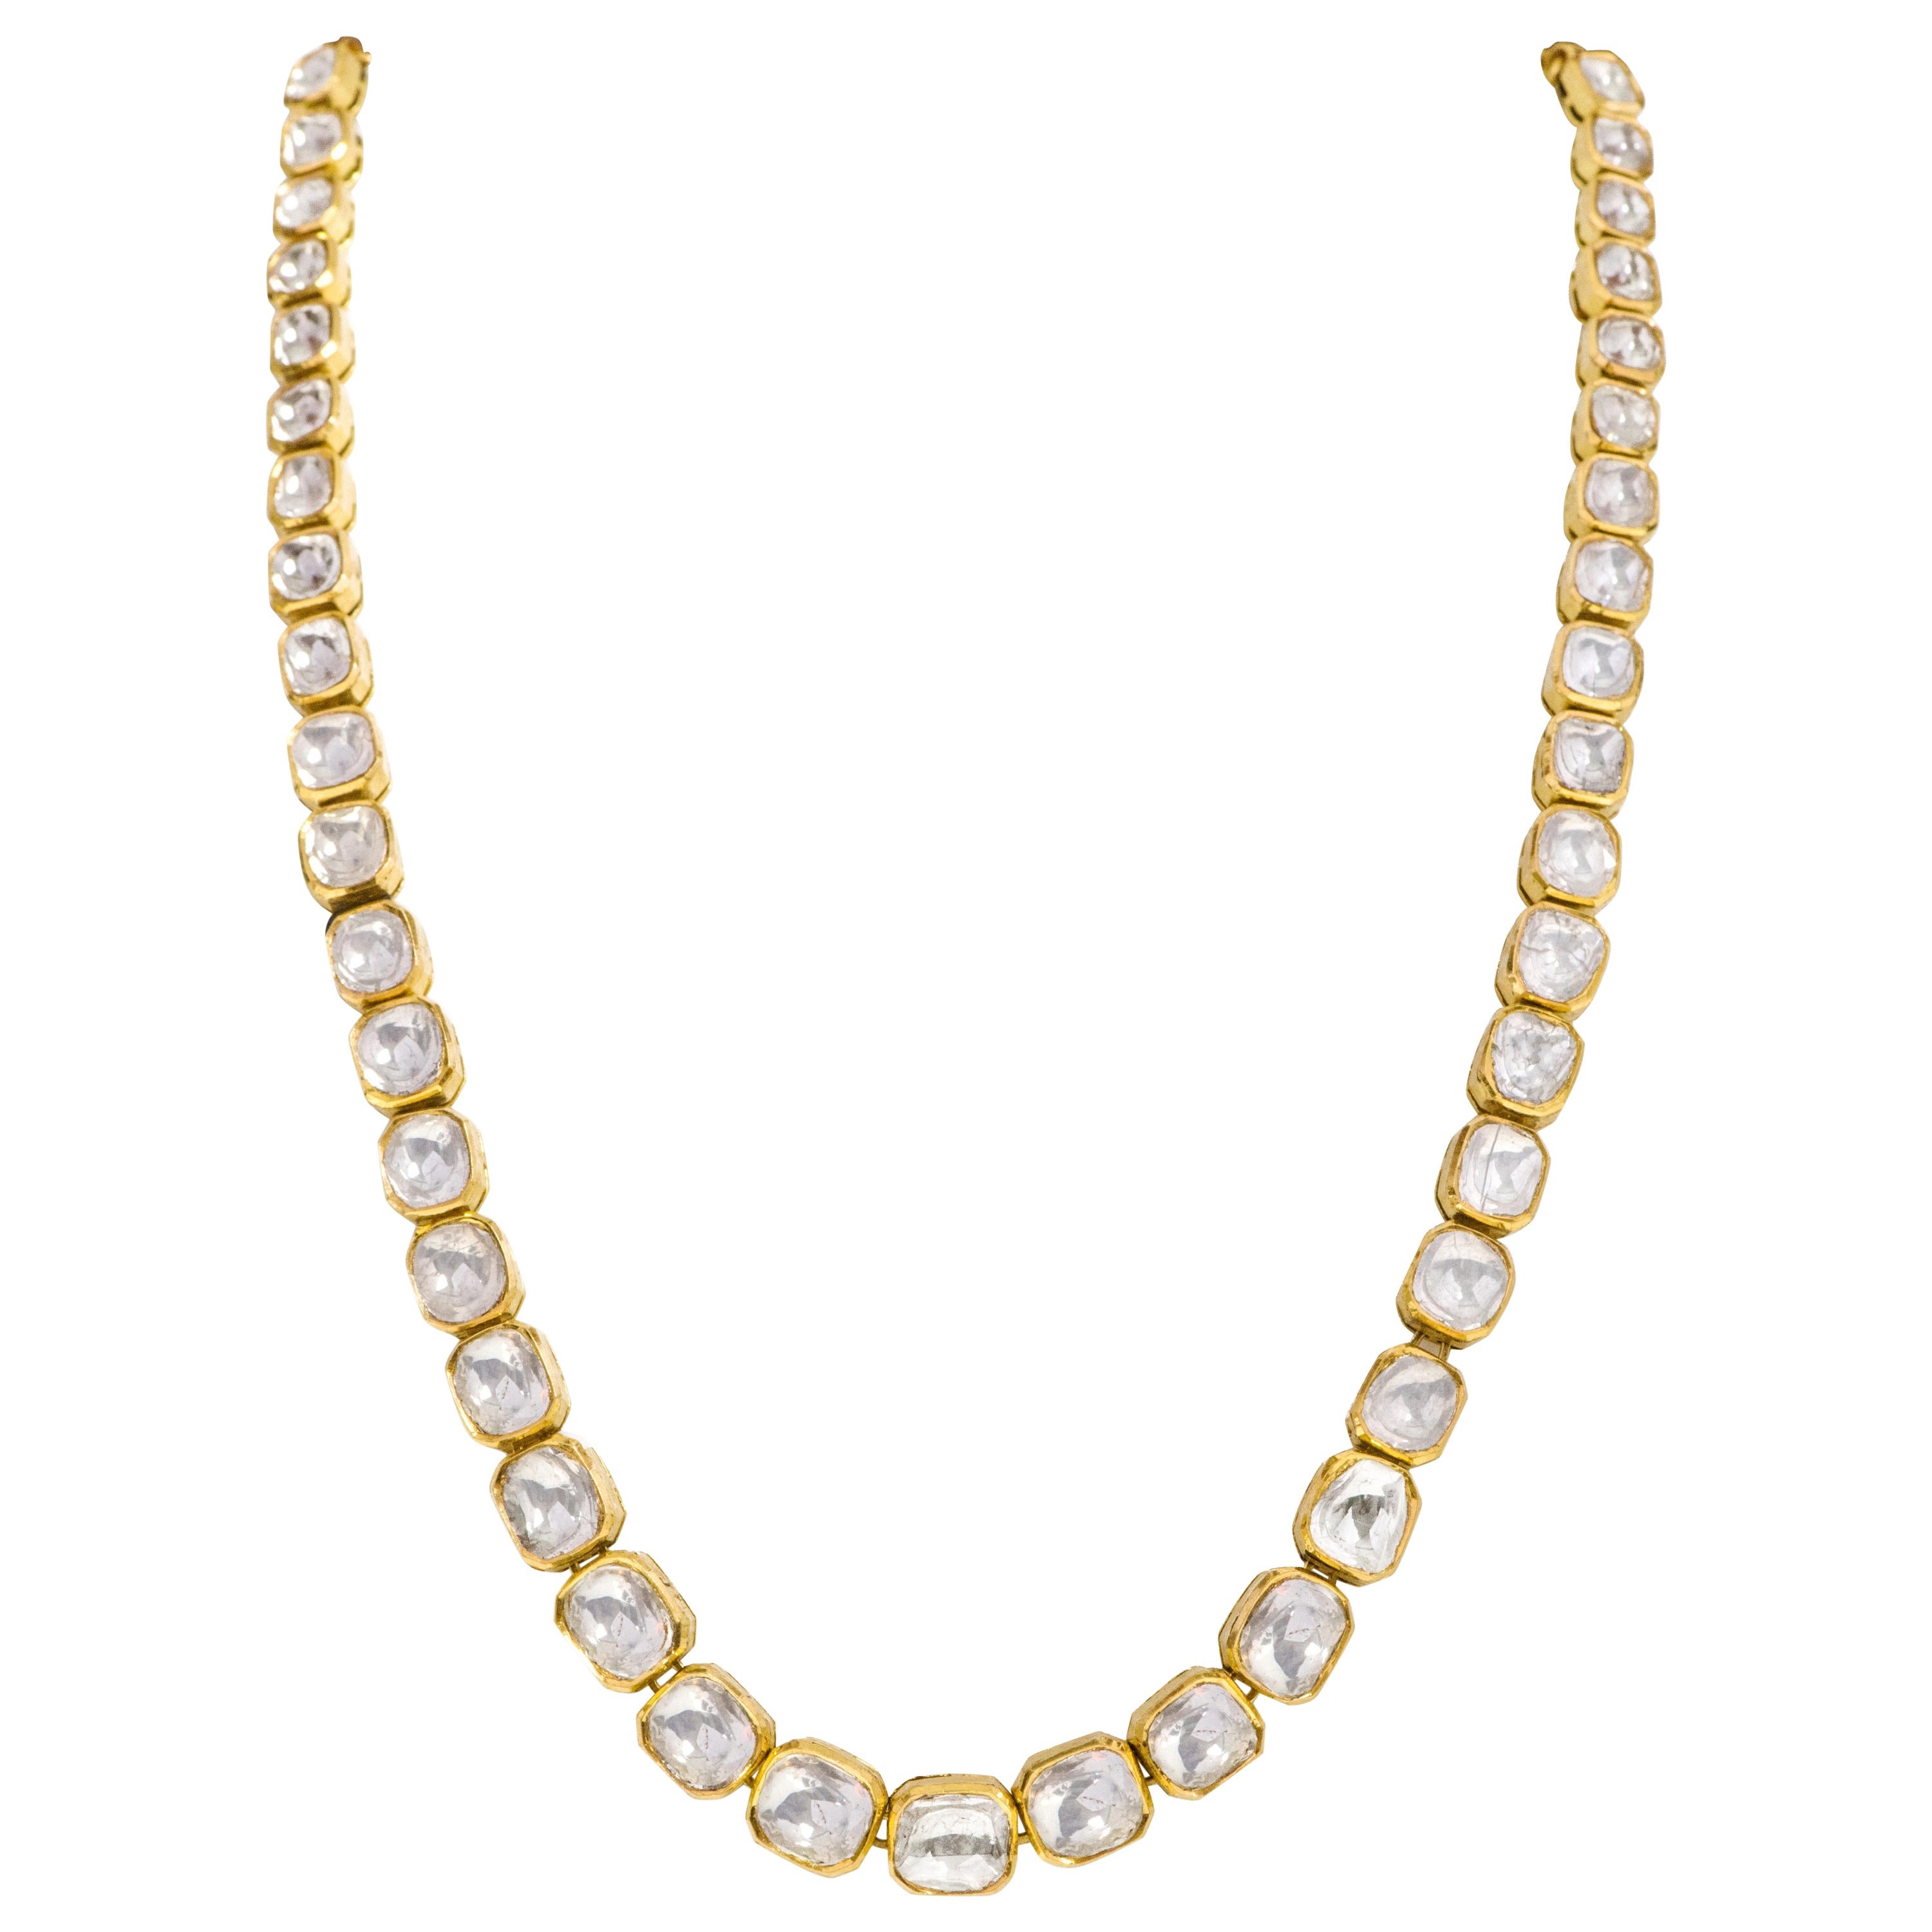 18 Karat Gold 14.13 Carats Diamond Necklace Handcrafted with Multi-Color Enamel